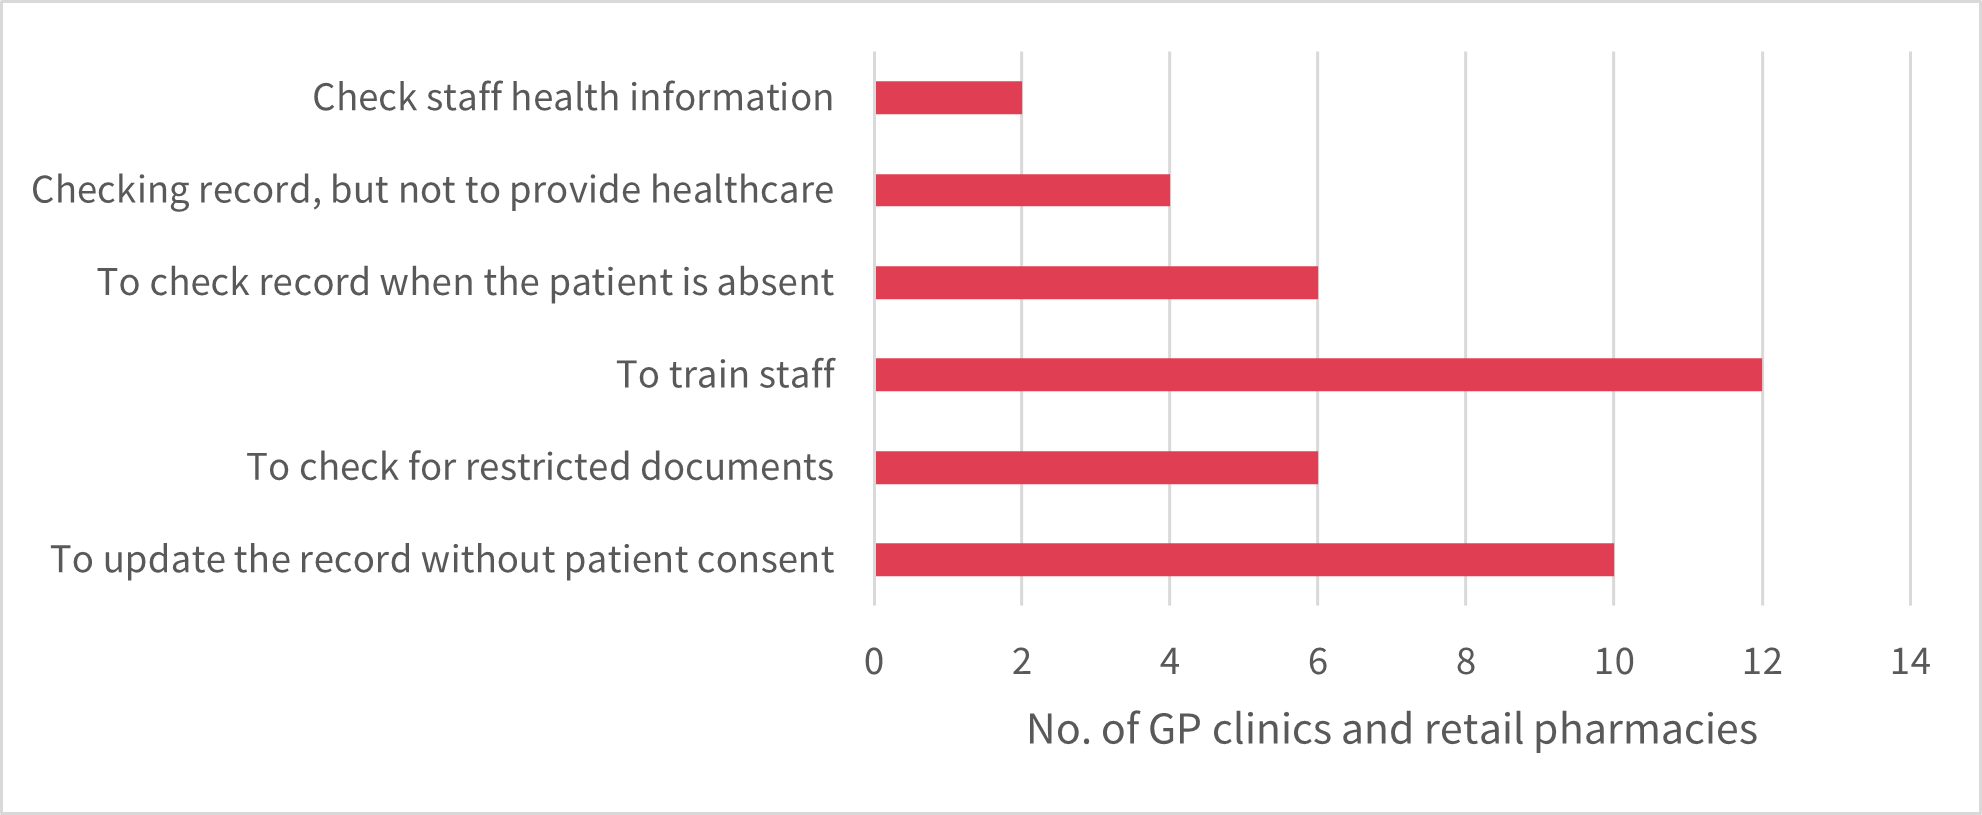 Bar graph showing responses with access reasons not authorised by the MHR Act